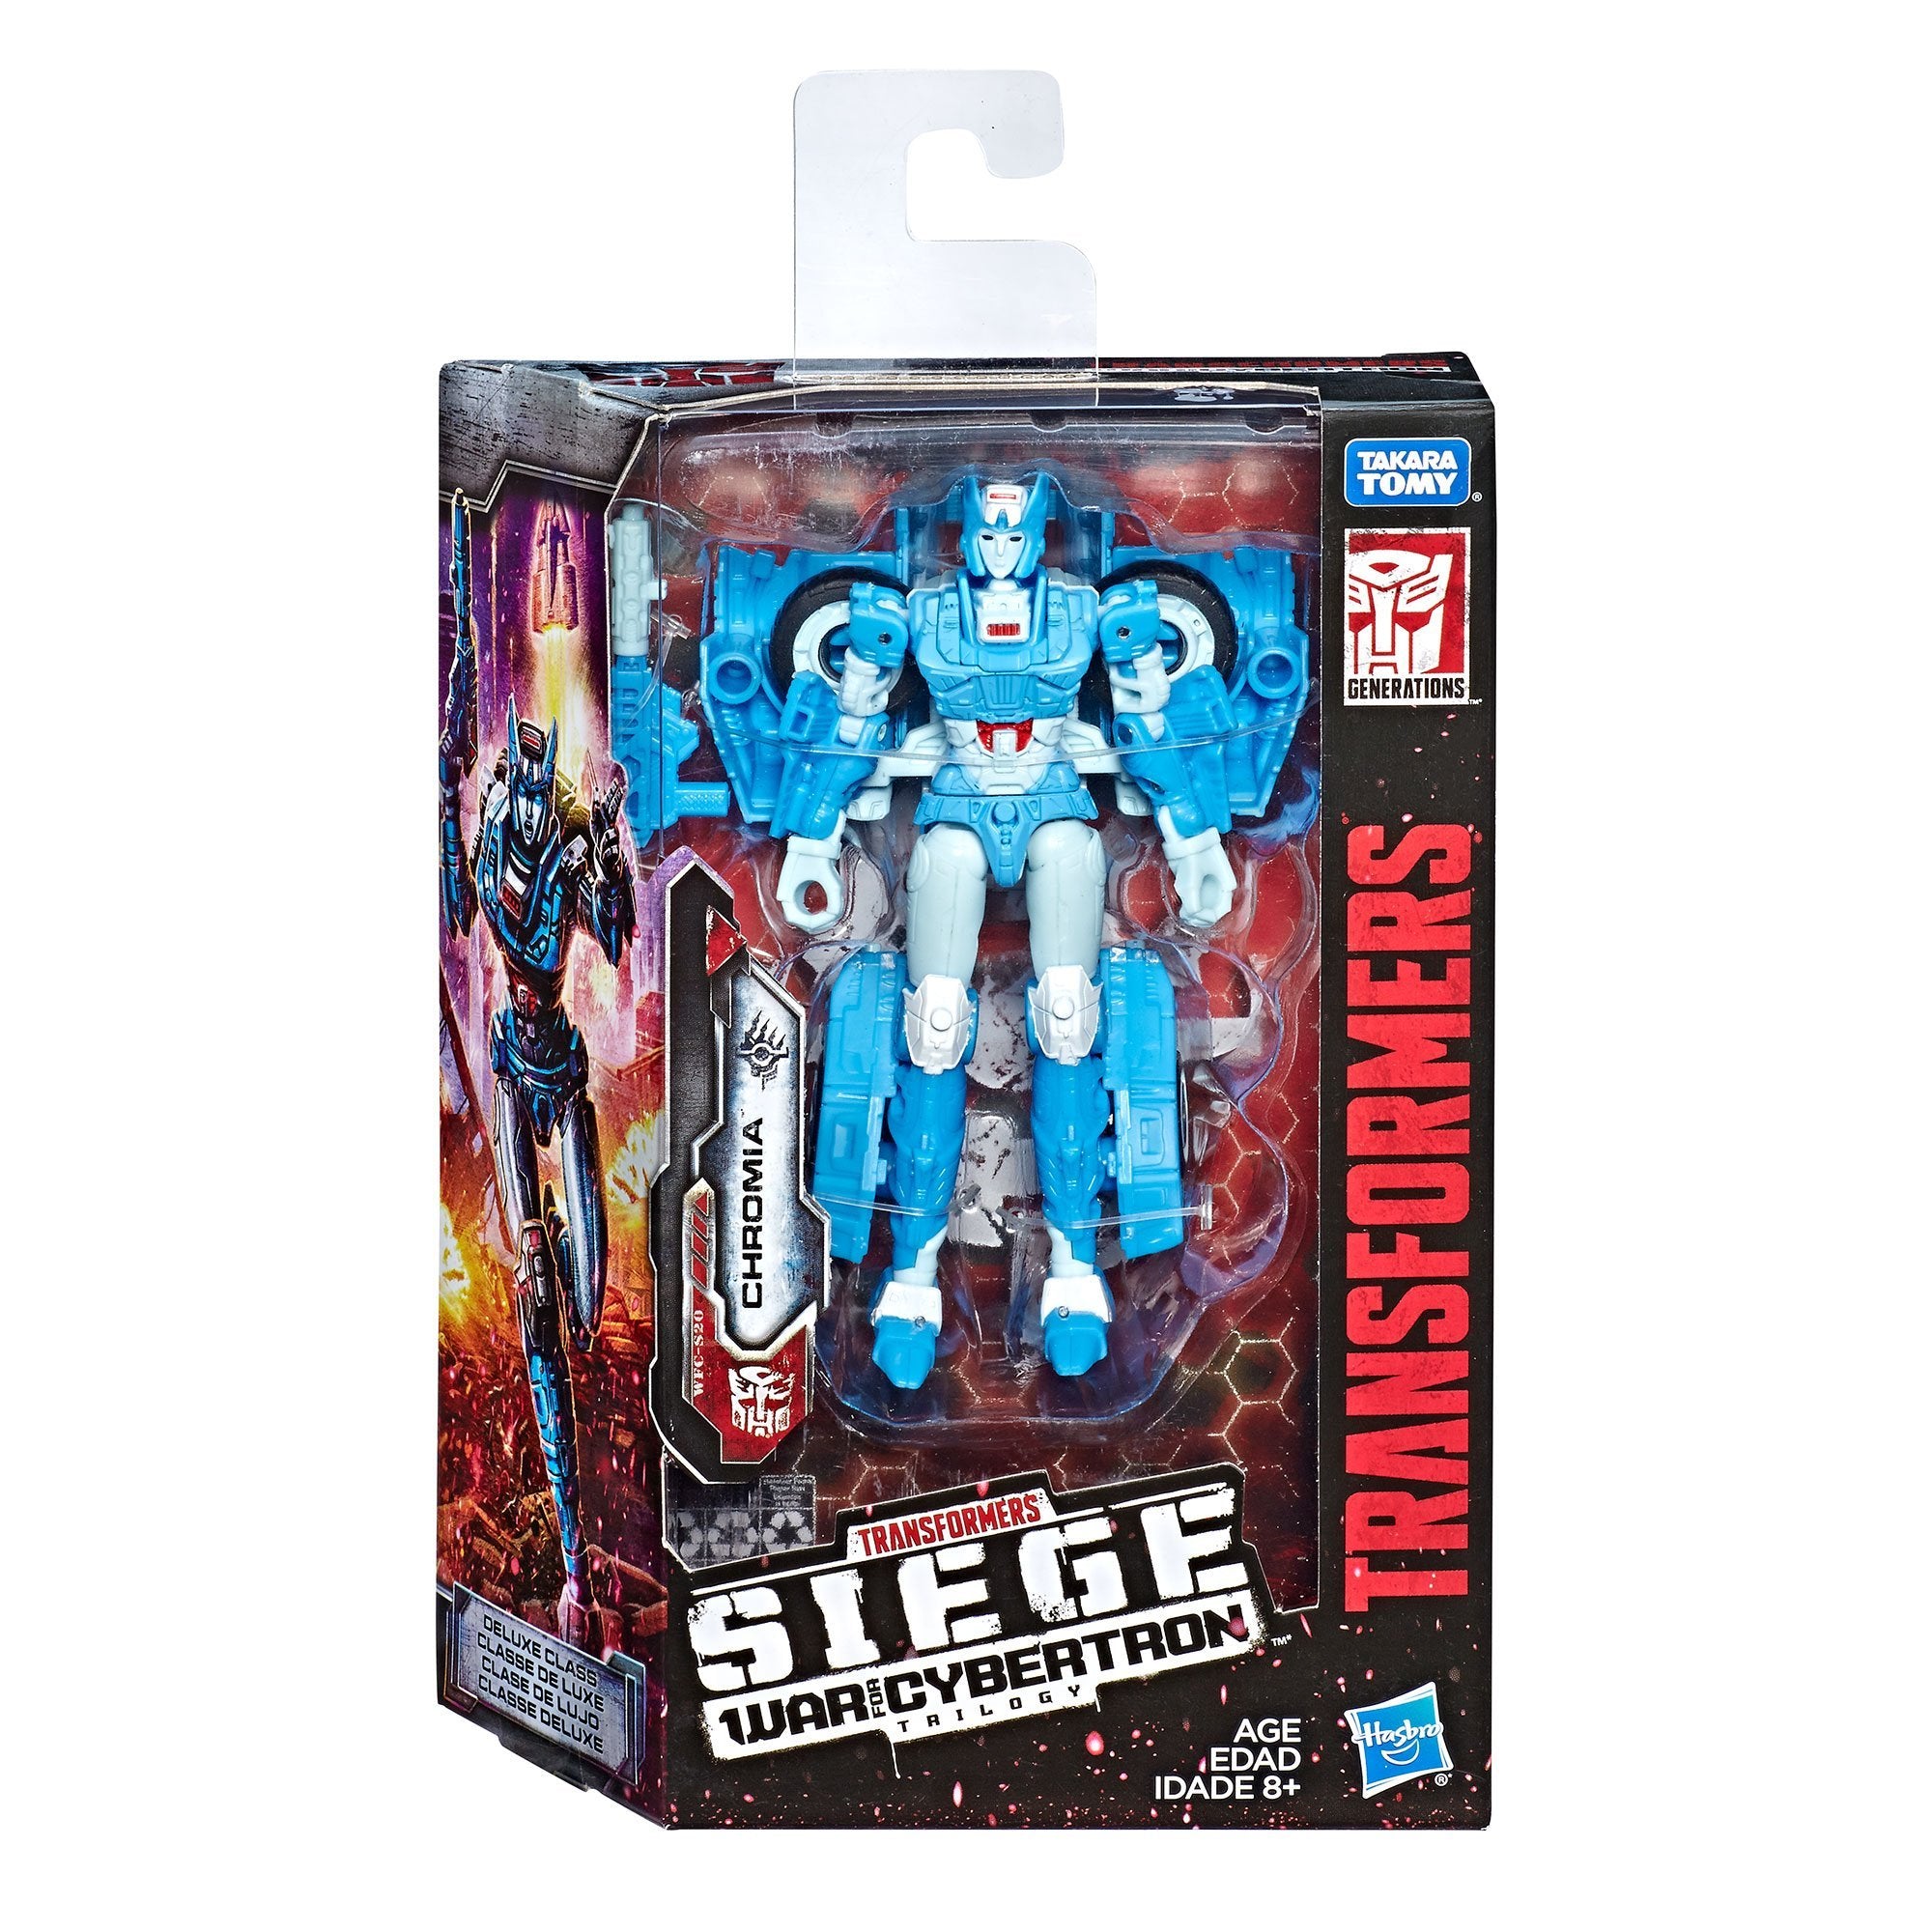 Transformers Siege War for Cybertron Deluxe Class Chromia